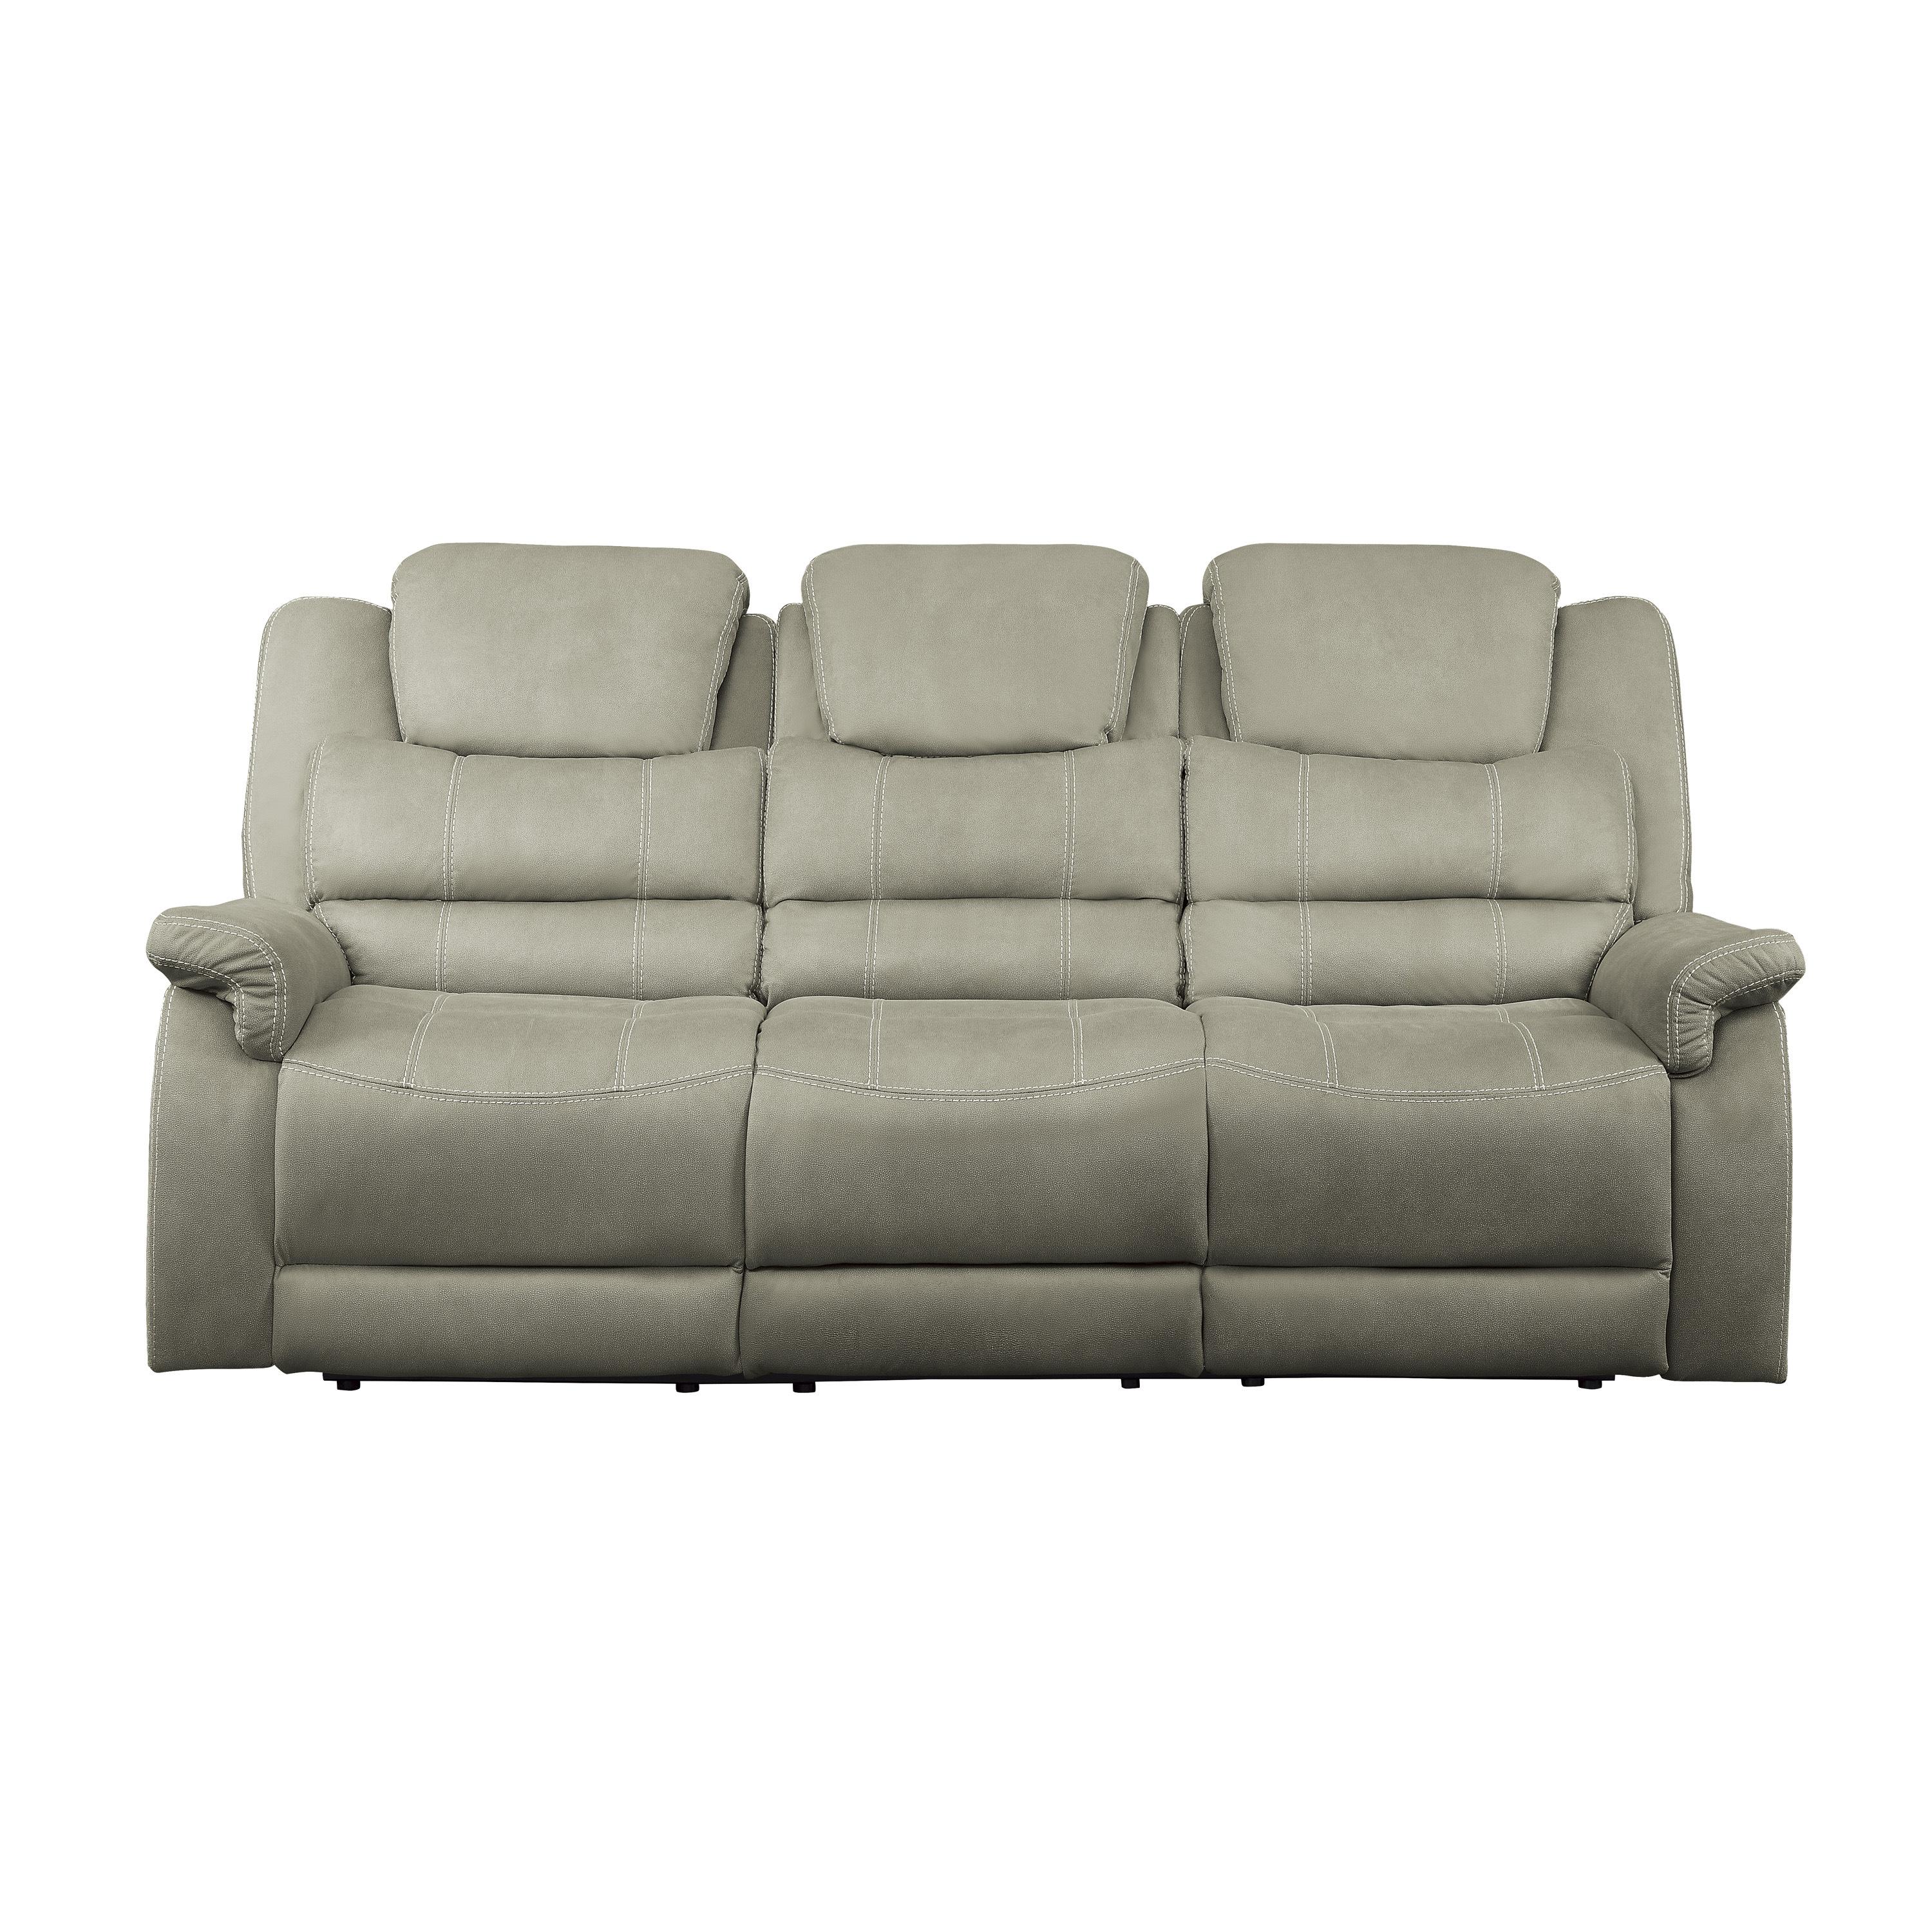 Transitional Reclining Sofa 9848GY-3 Shola 9848GY-3 in Gray Microfiber